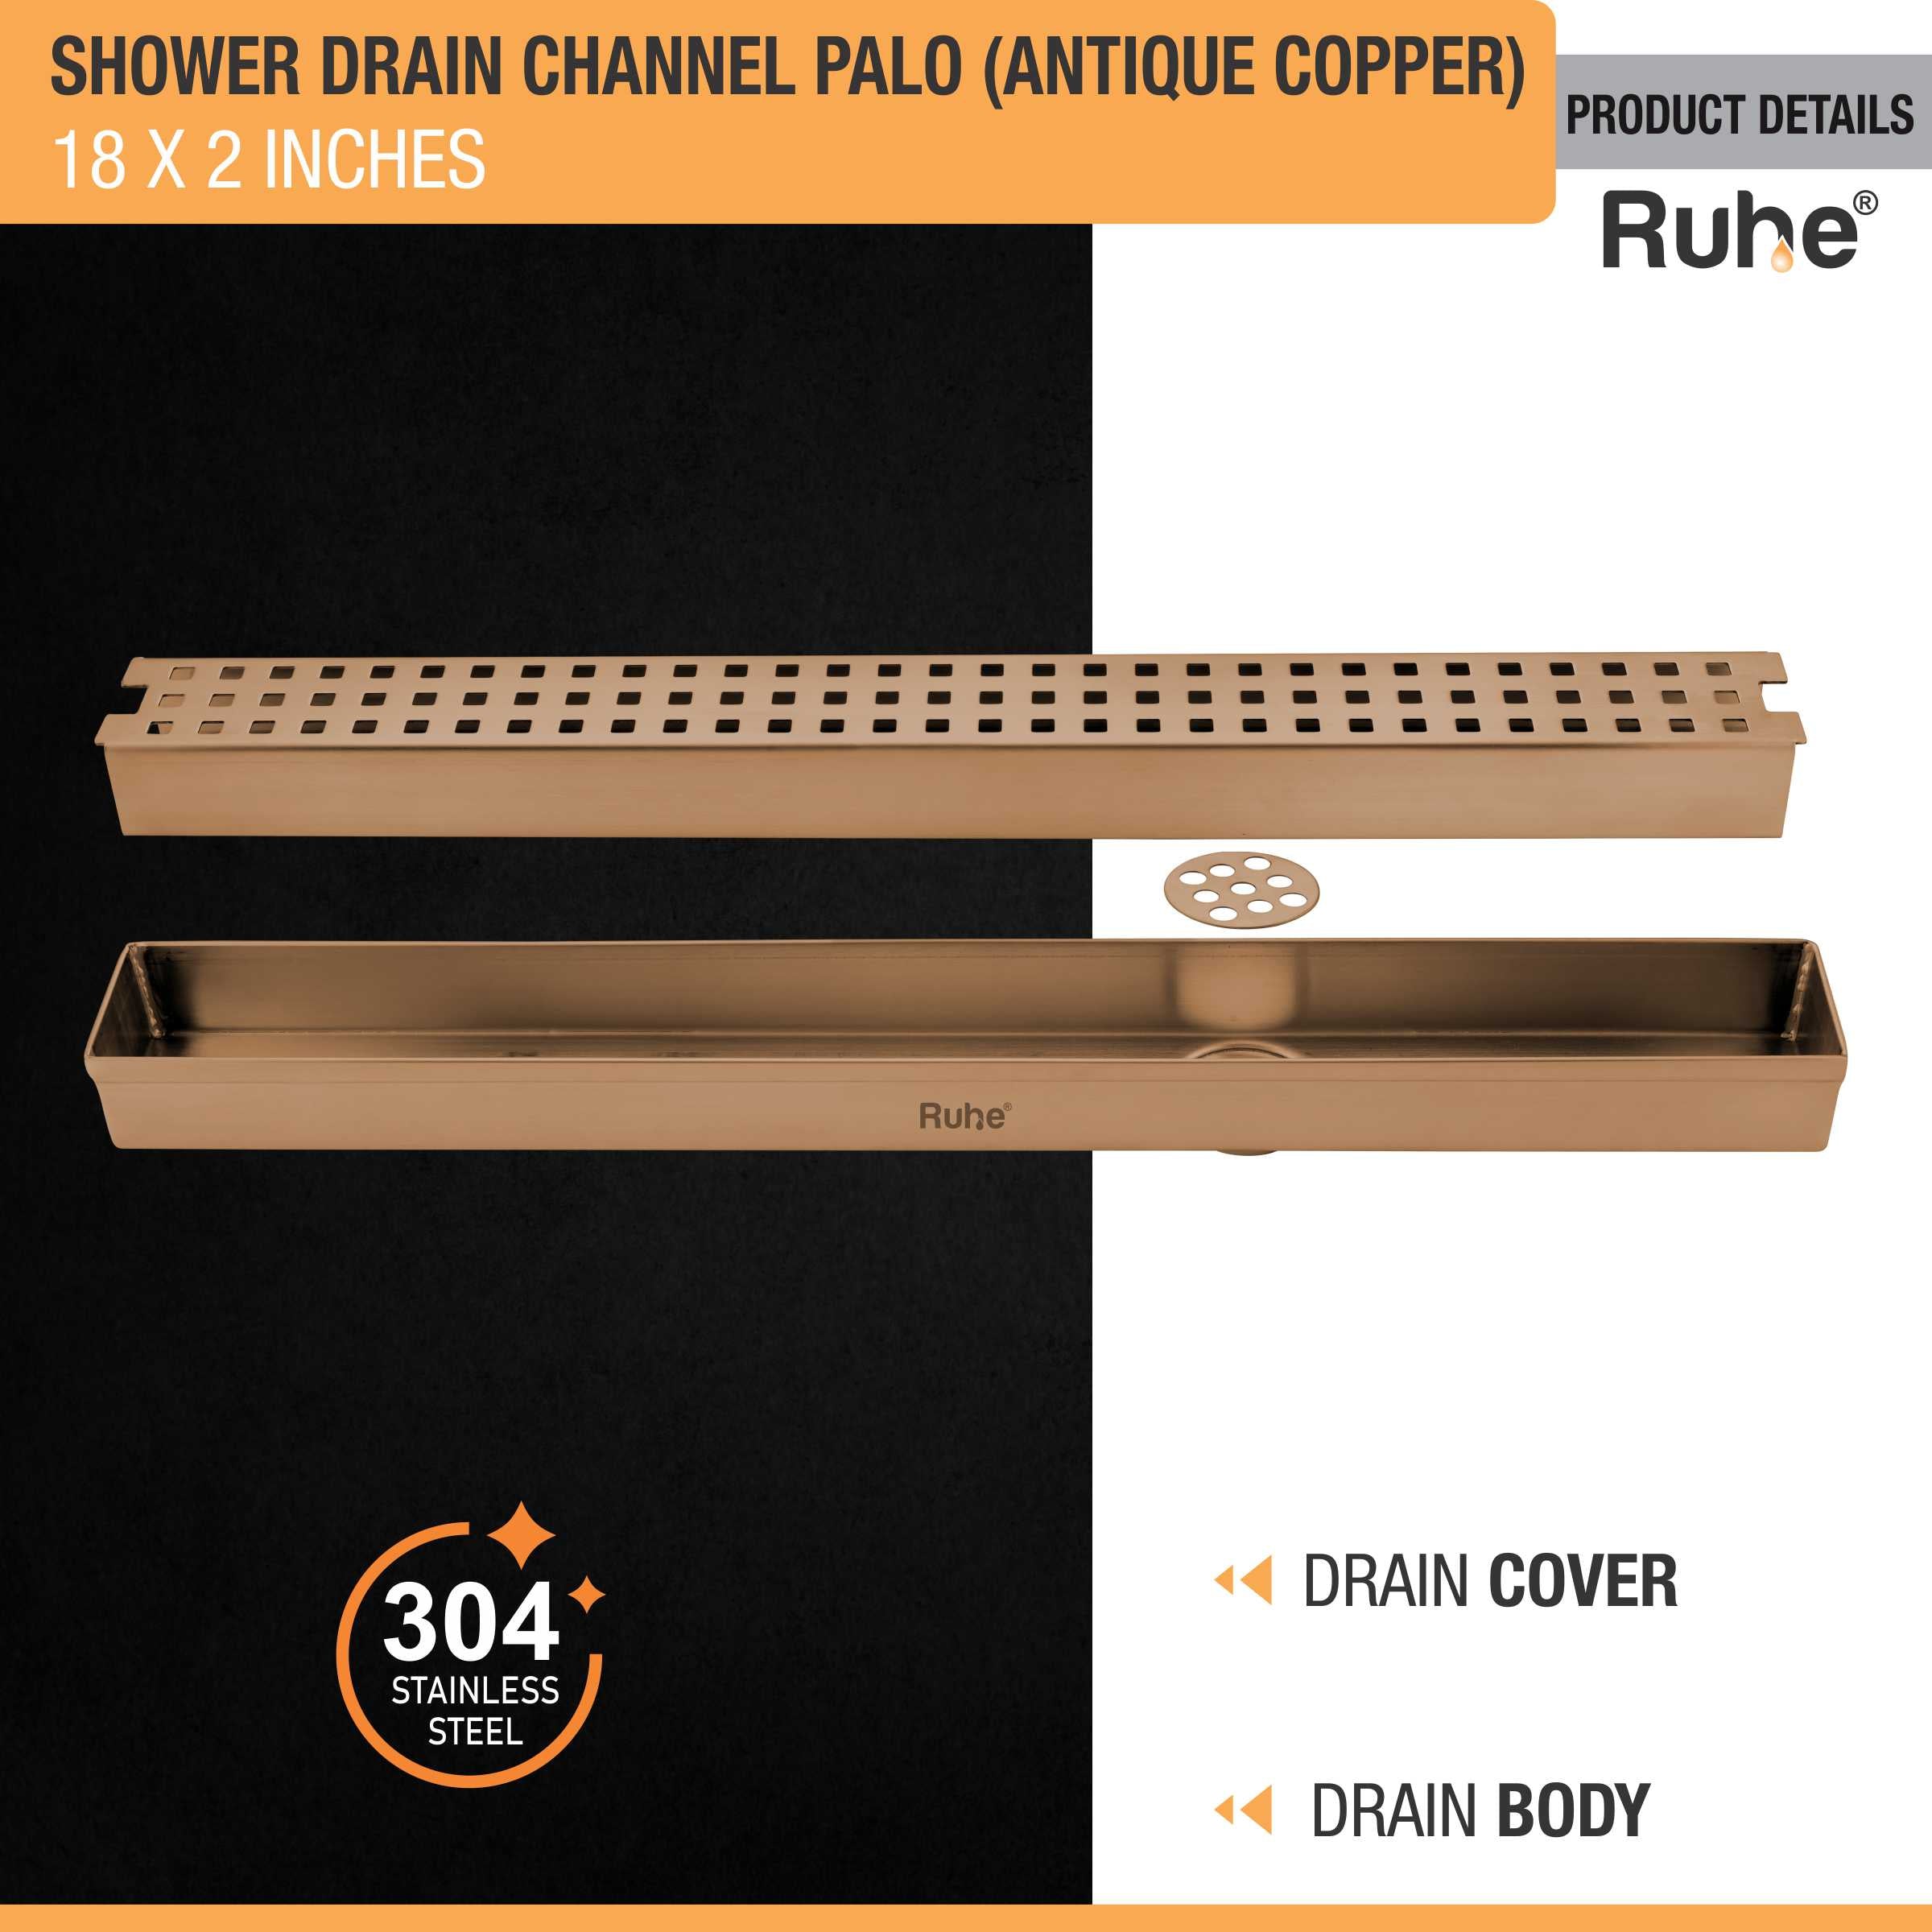 Palo Shower Drain Channel (18 x 2 Inches) ROSE GOLD/ANTIQUE COPPER product details